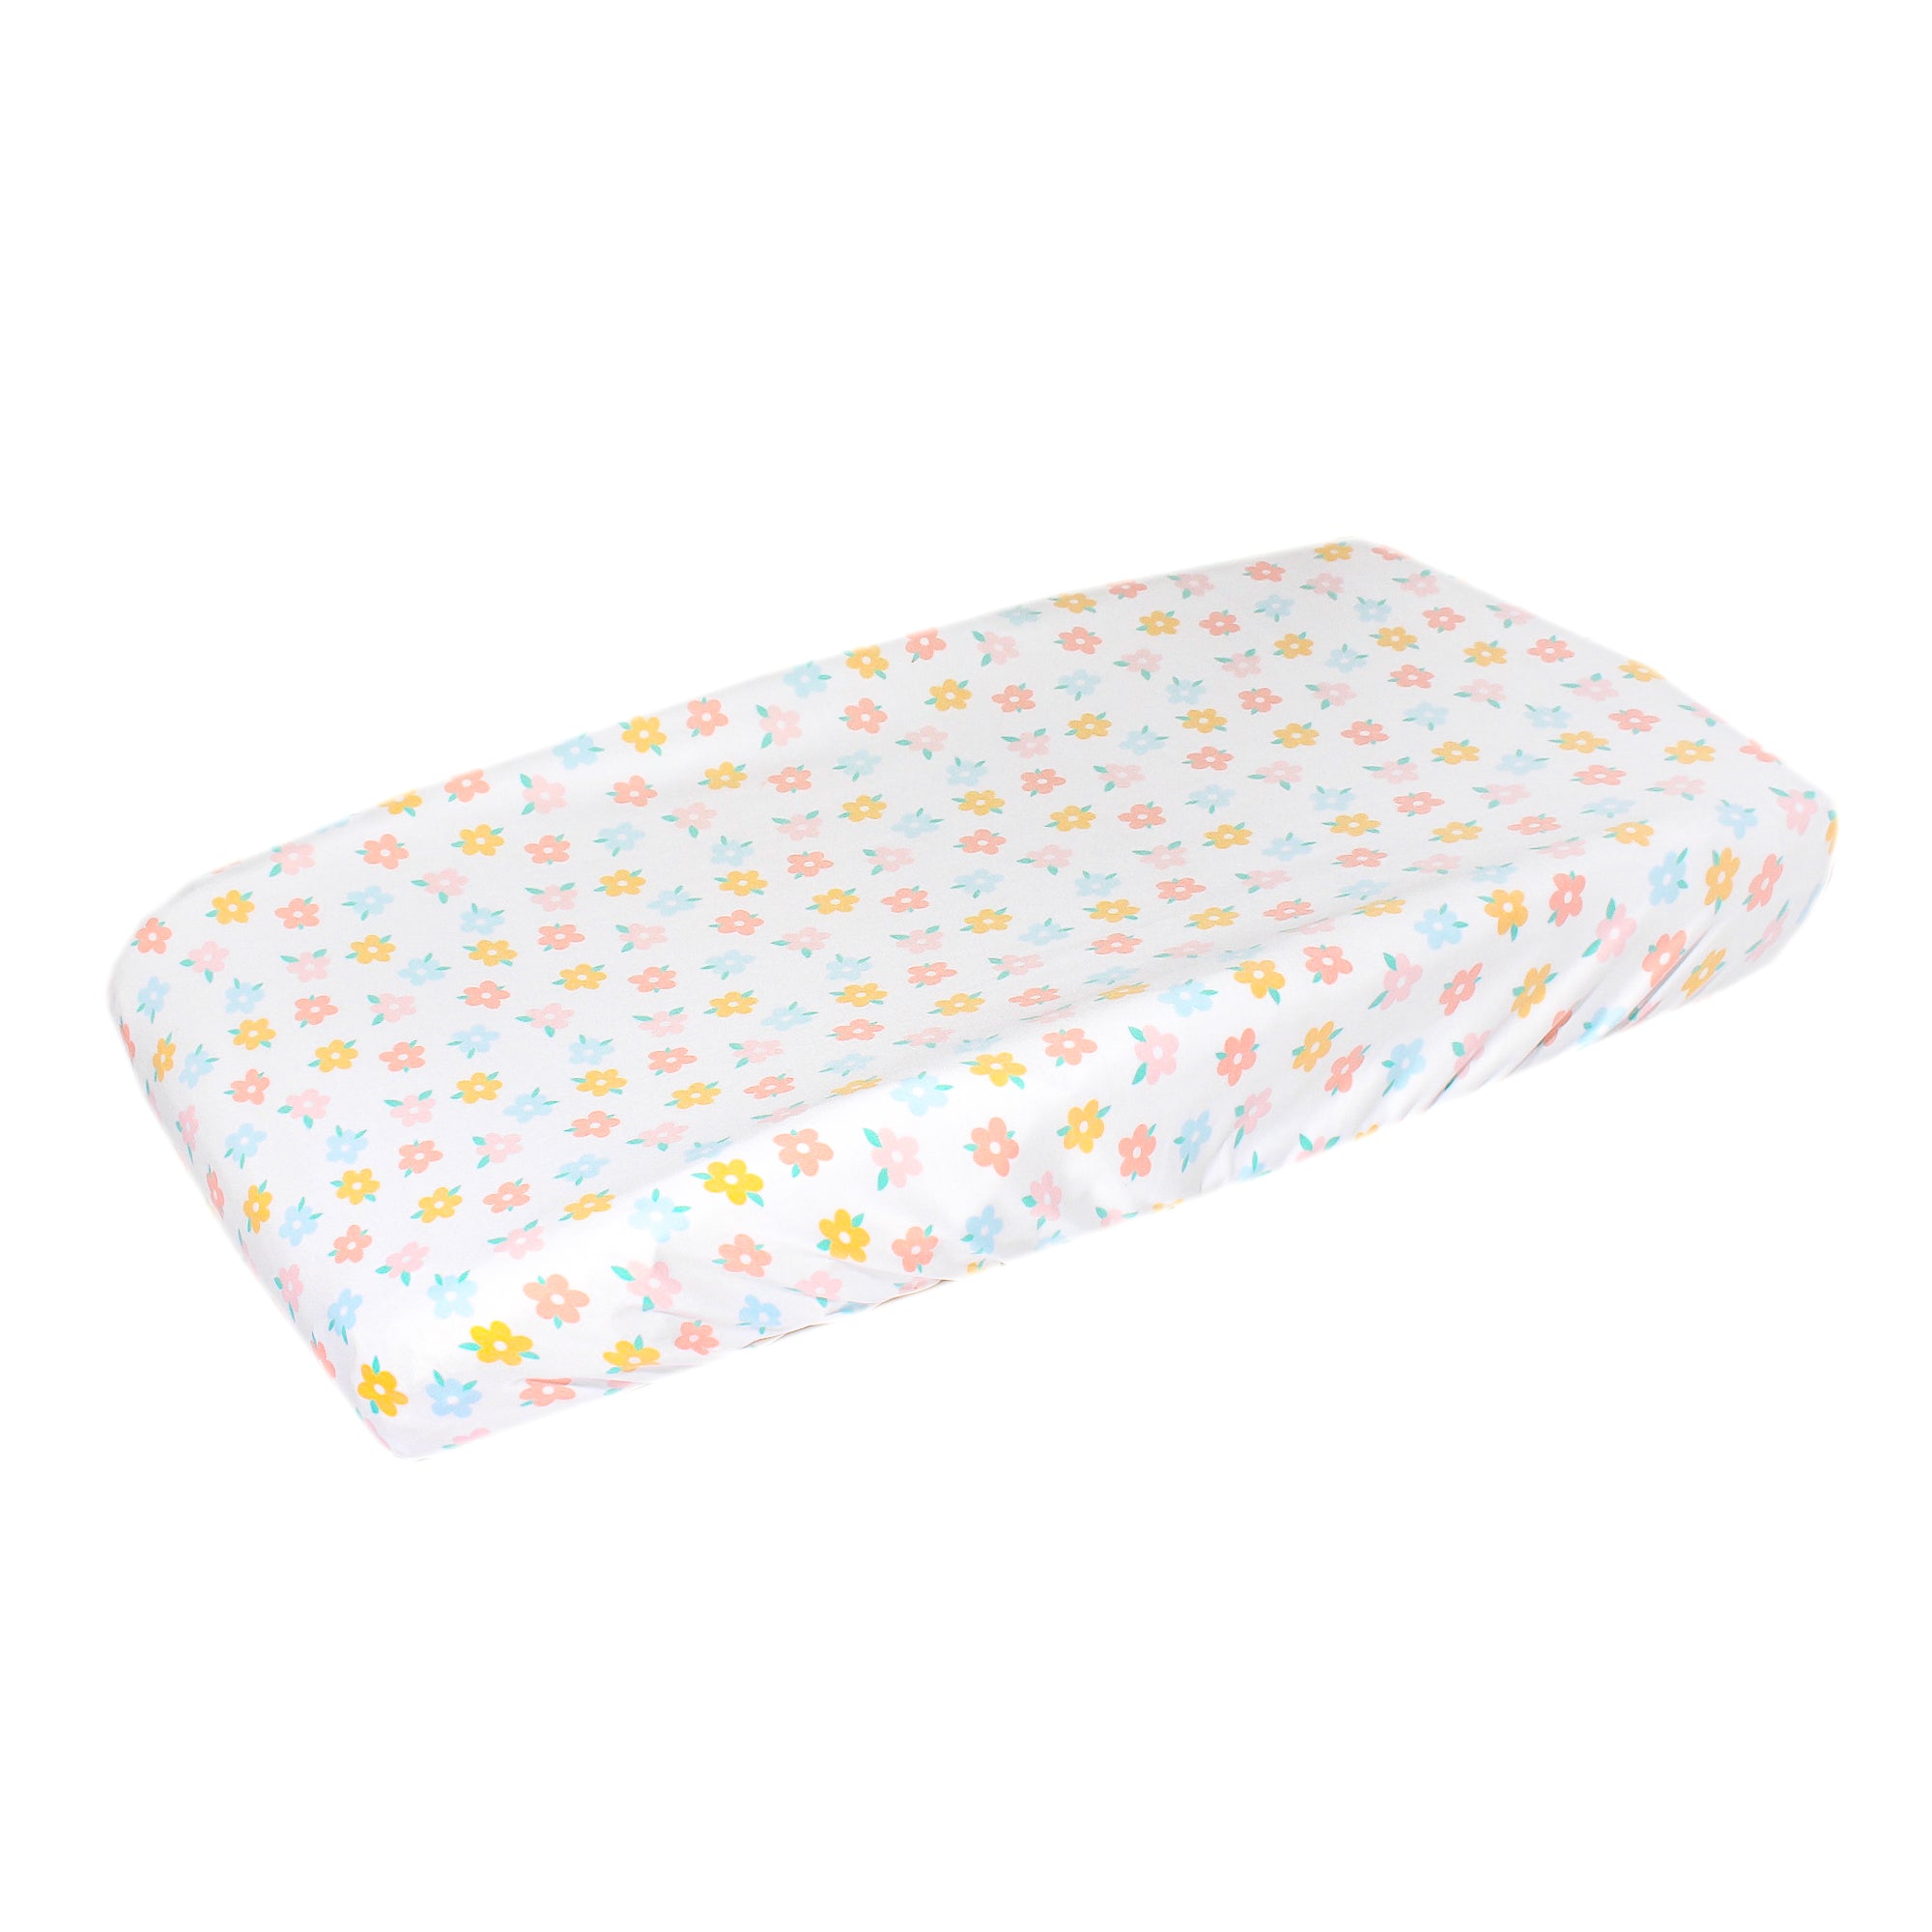 Premium Knit Diaper Changing Pad Cover - Daisy